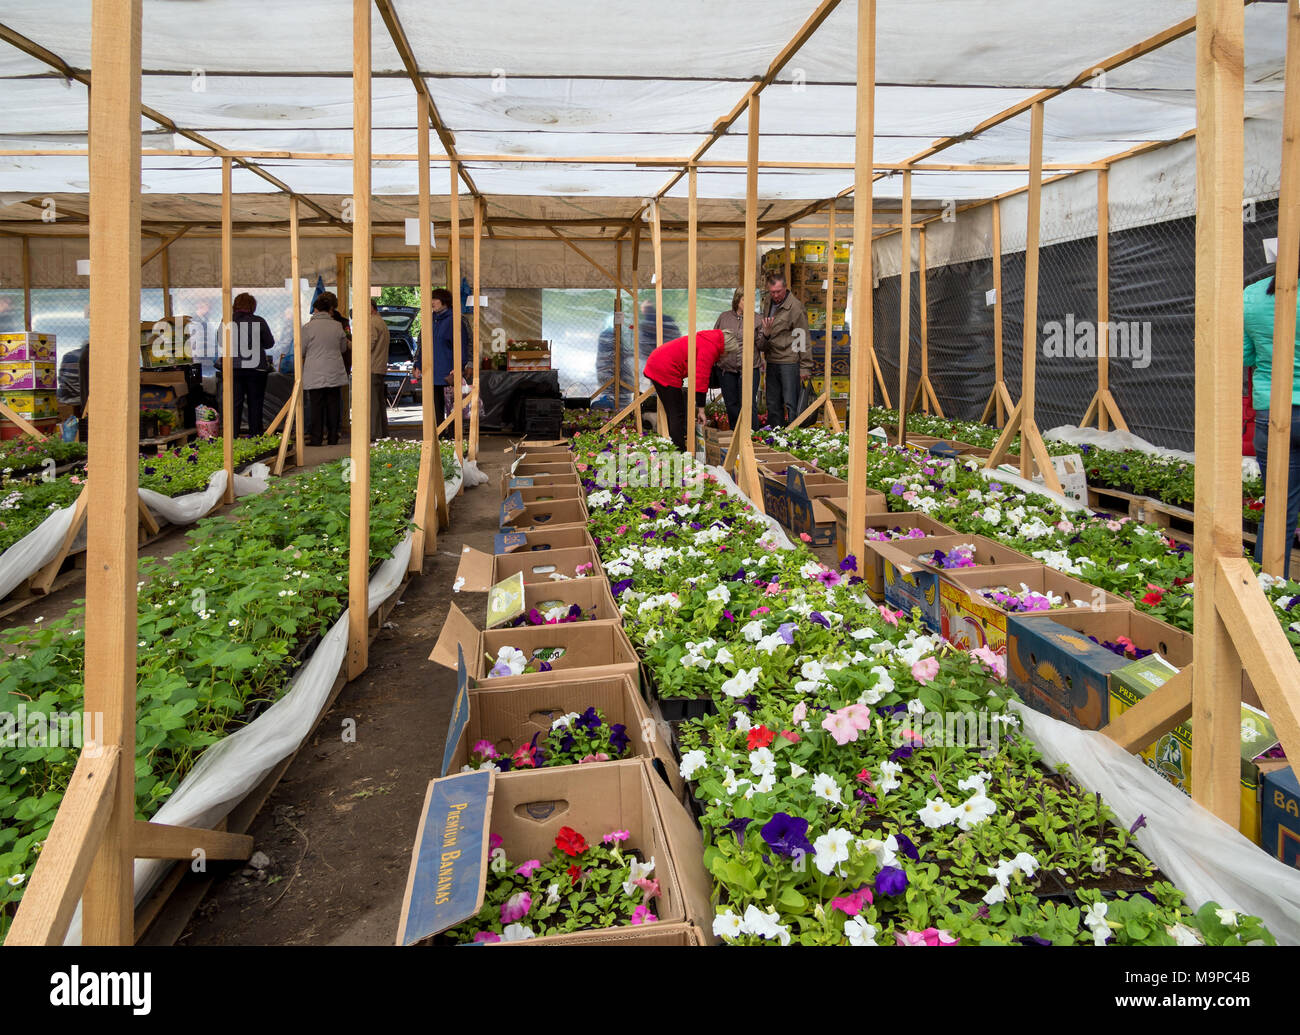 Voronezh, Russia - May 13, 2017: Sale of flower seedlings in a street pavilion at the 'Ptich' market in Voronezh Stock Photo